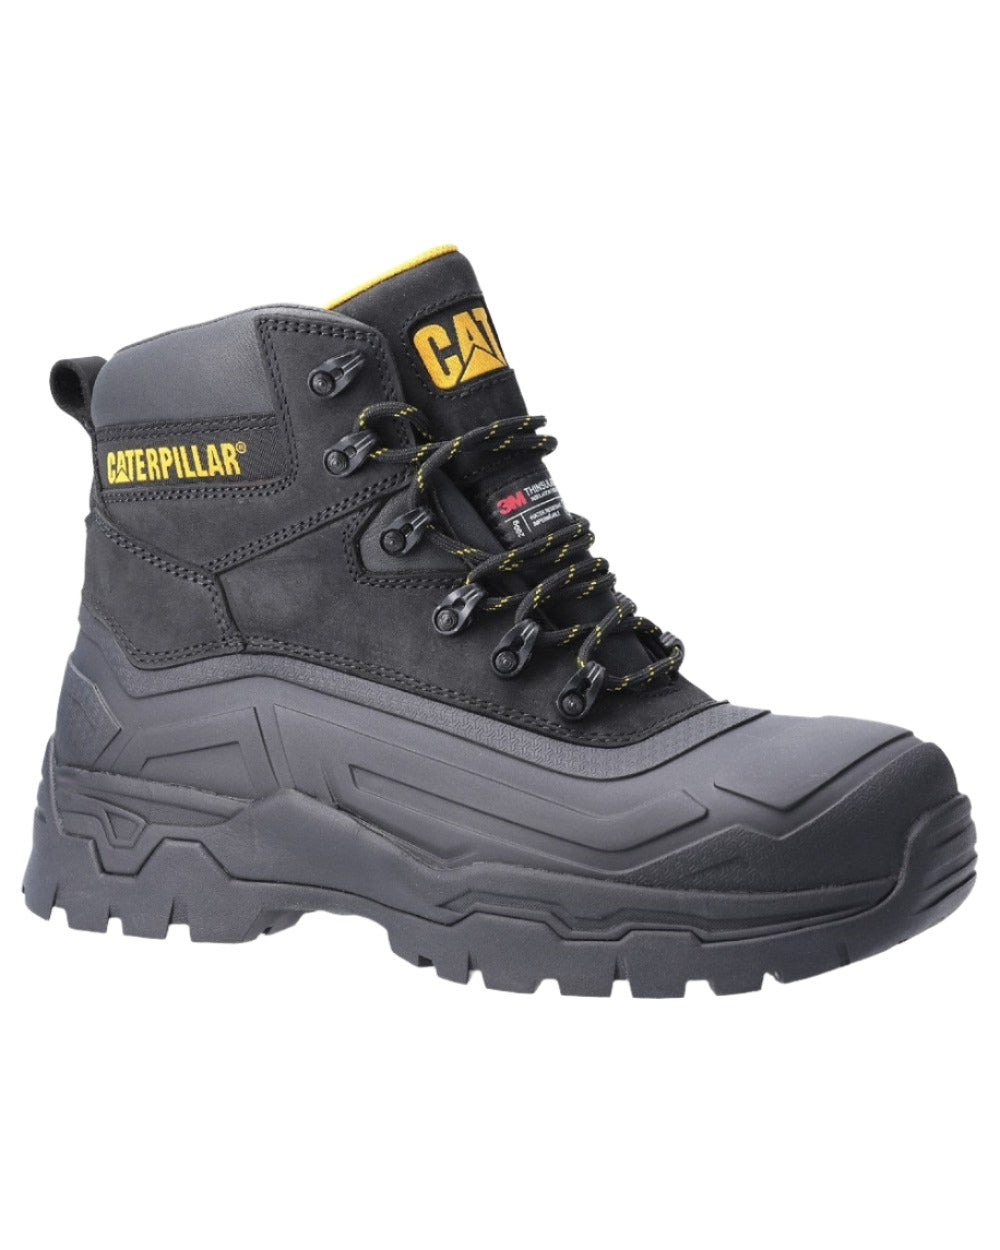 Black Coloured Caterpillar Typhoon SBH Safety Boot On A White Background